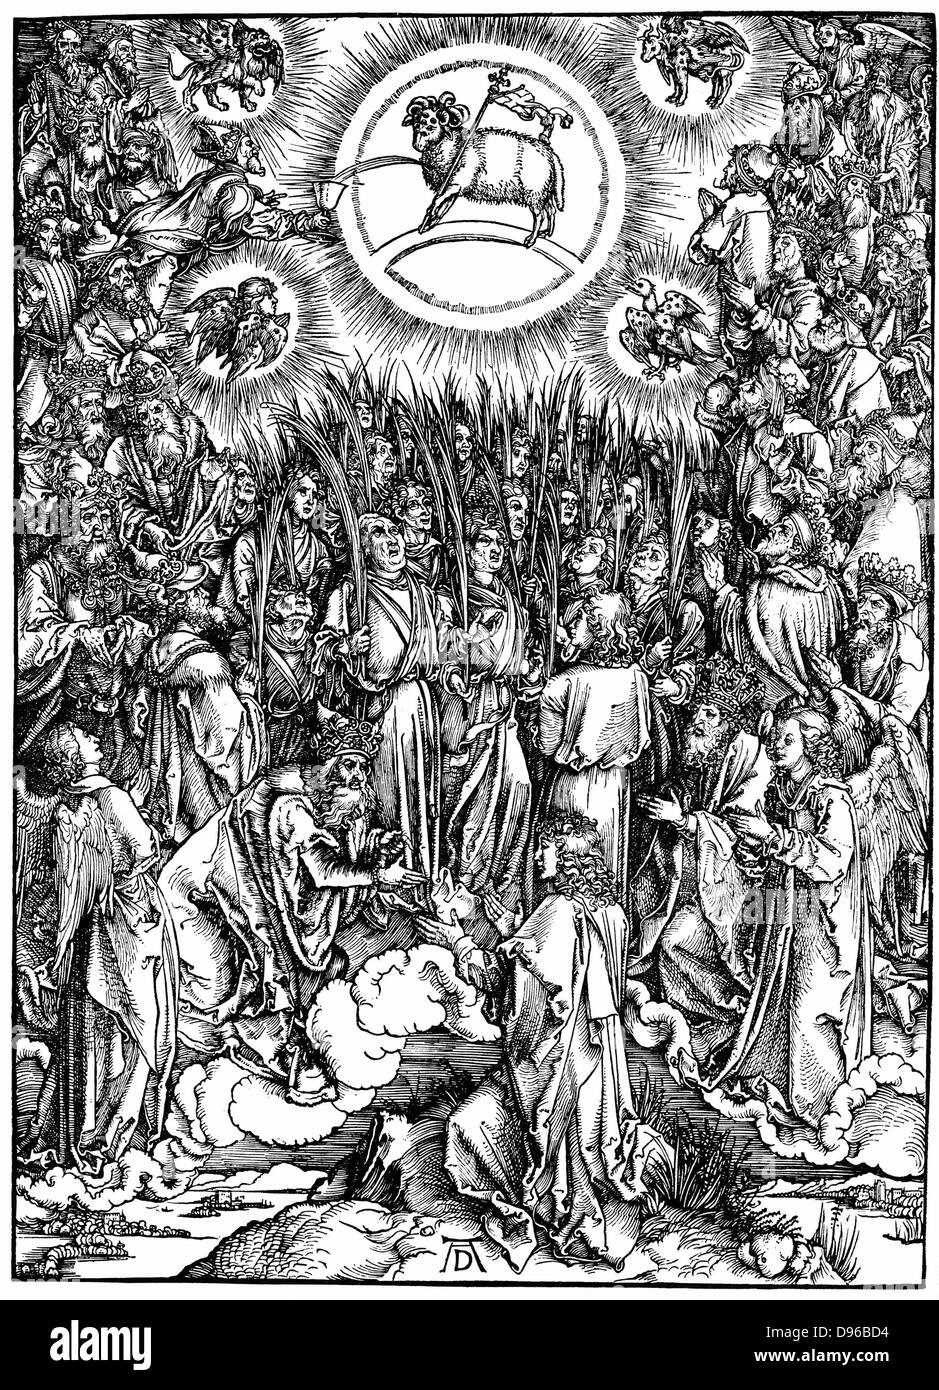 The Revelation of S. John (Apocalypse) The Adoration of the Lamb and the Hymn of the Chosen Woodcut by Albrecht Durer c1498. Stock Photo